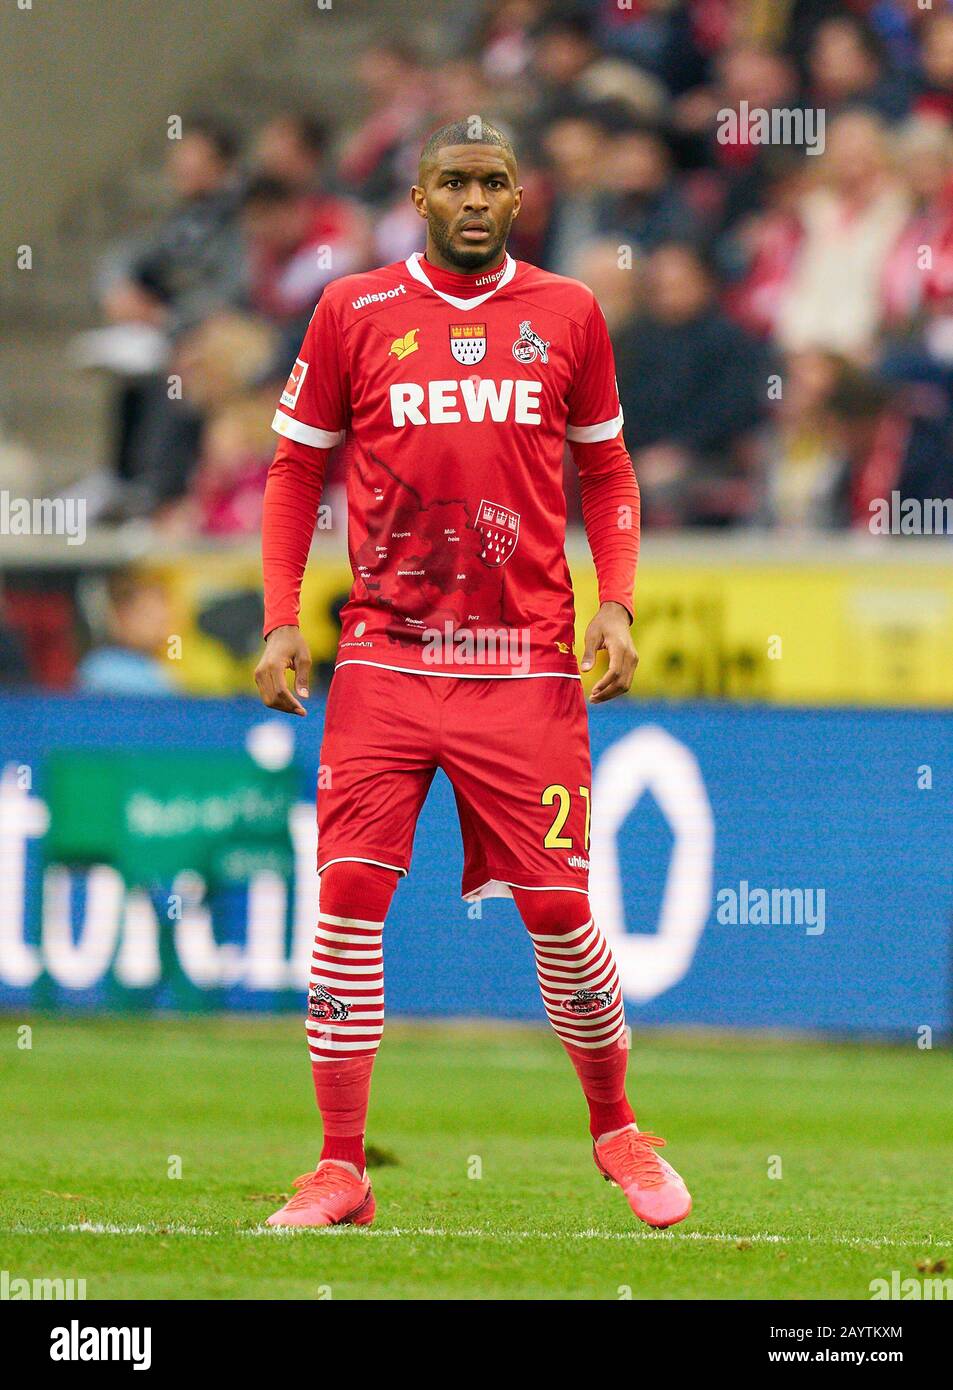 Anthony Modeste 1 Fc Koln High Resolution Stock Photography and Images -  Alamy